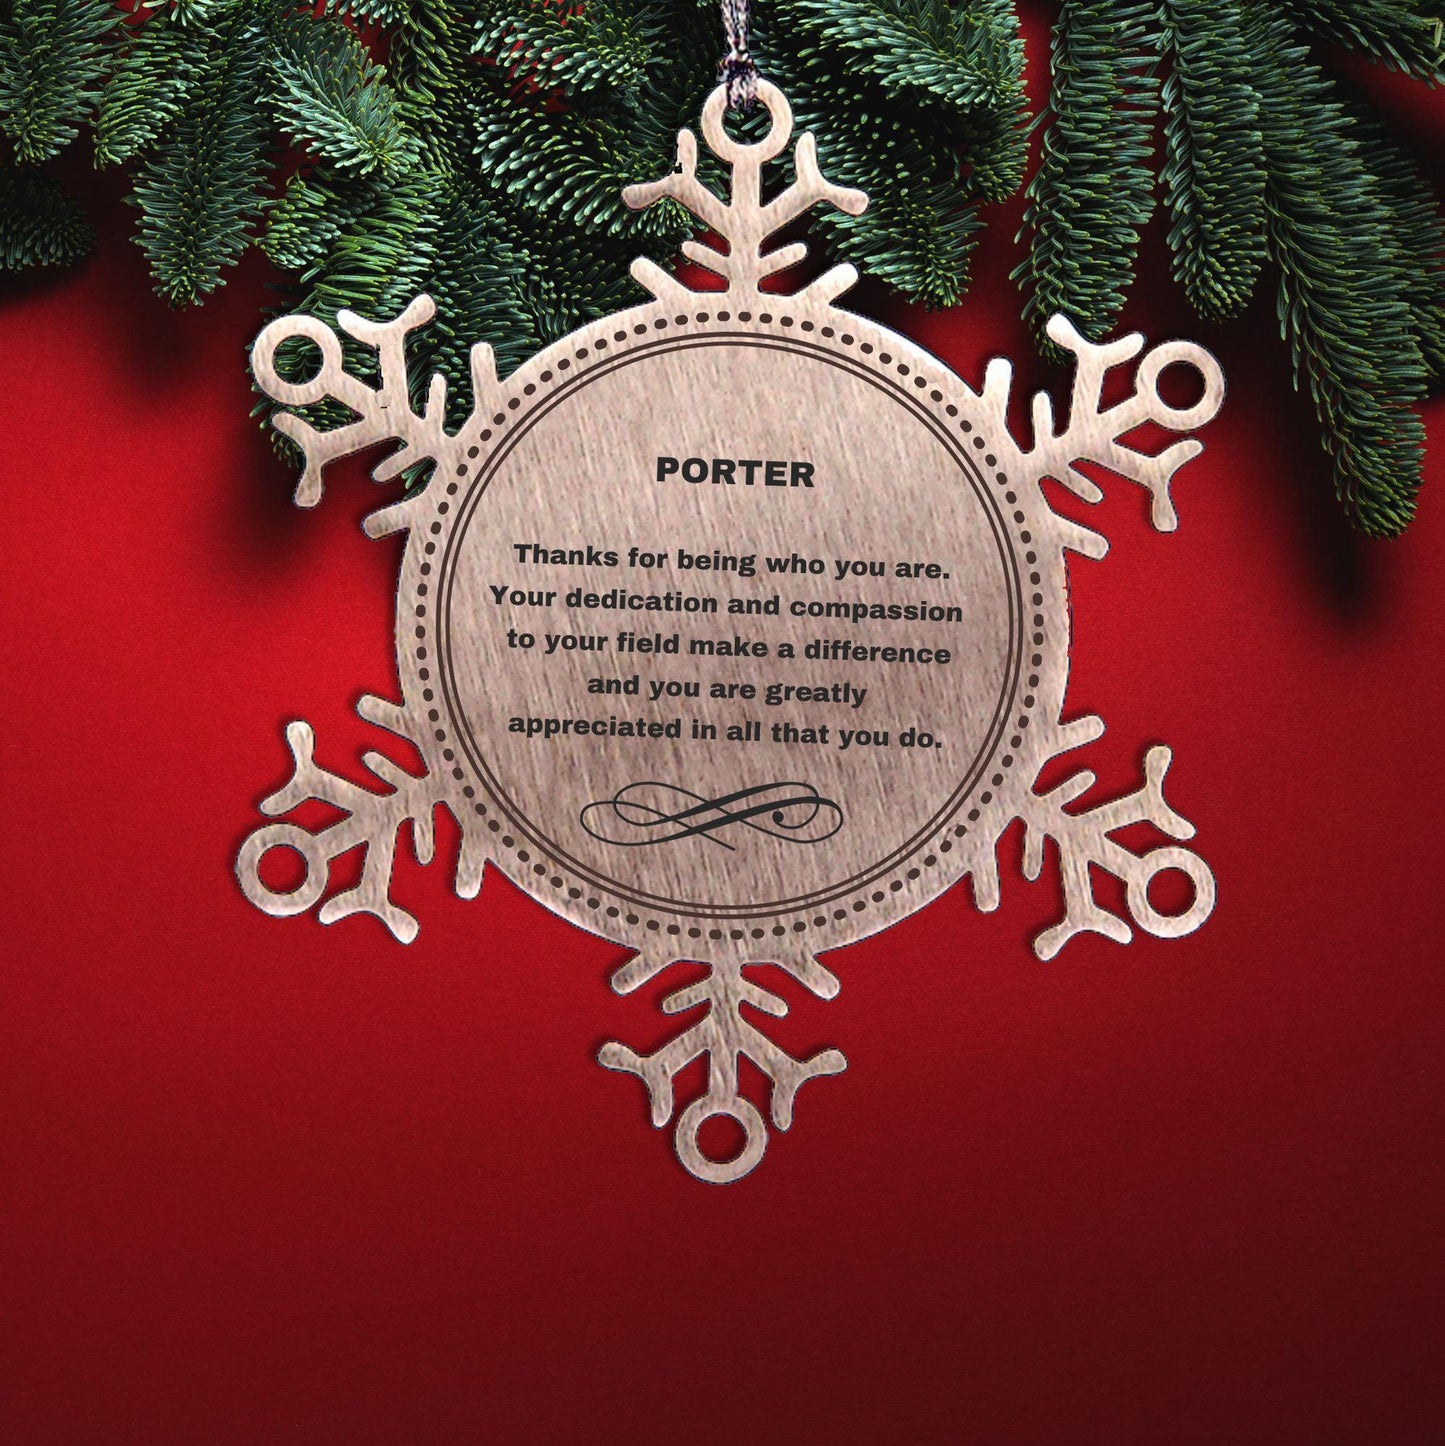 Porter Snowflake Ornament - Thanks for being who you are - Birthday Christmas Jewelry Gifts Coworkers Colleague Boss - Mallard Moon Gift Shop